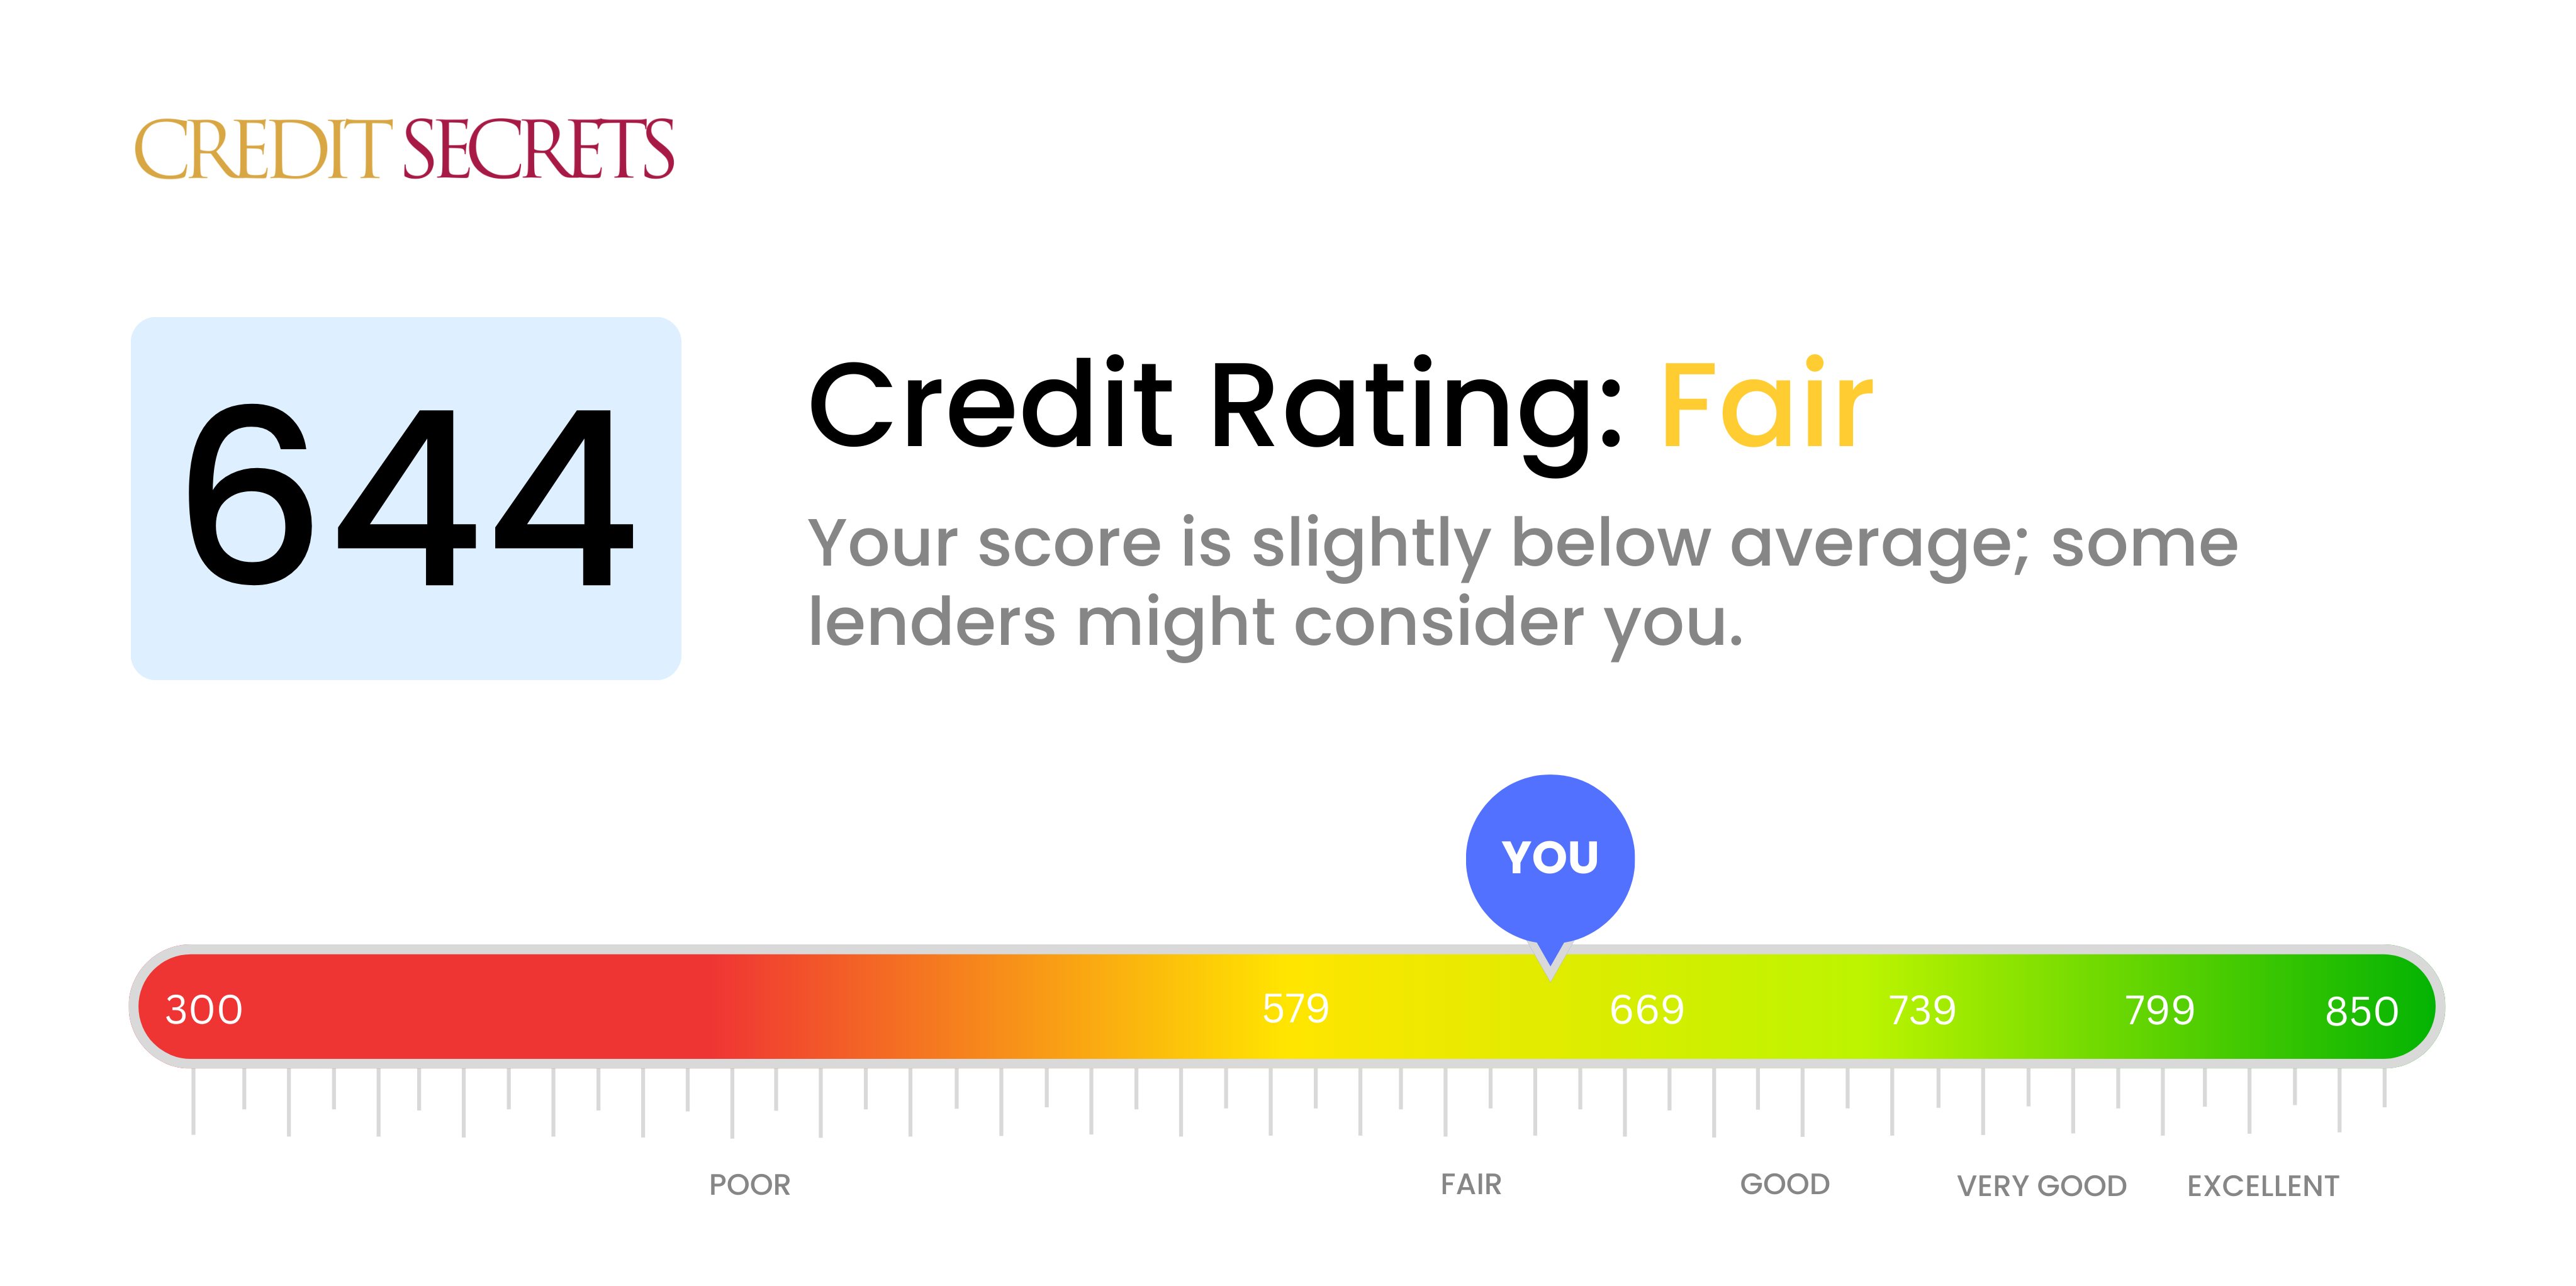 Is 644 a good credit score?